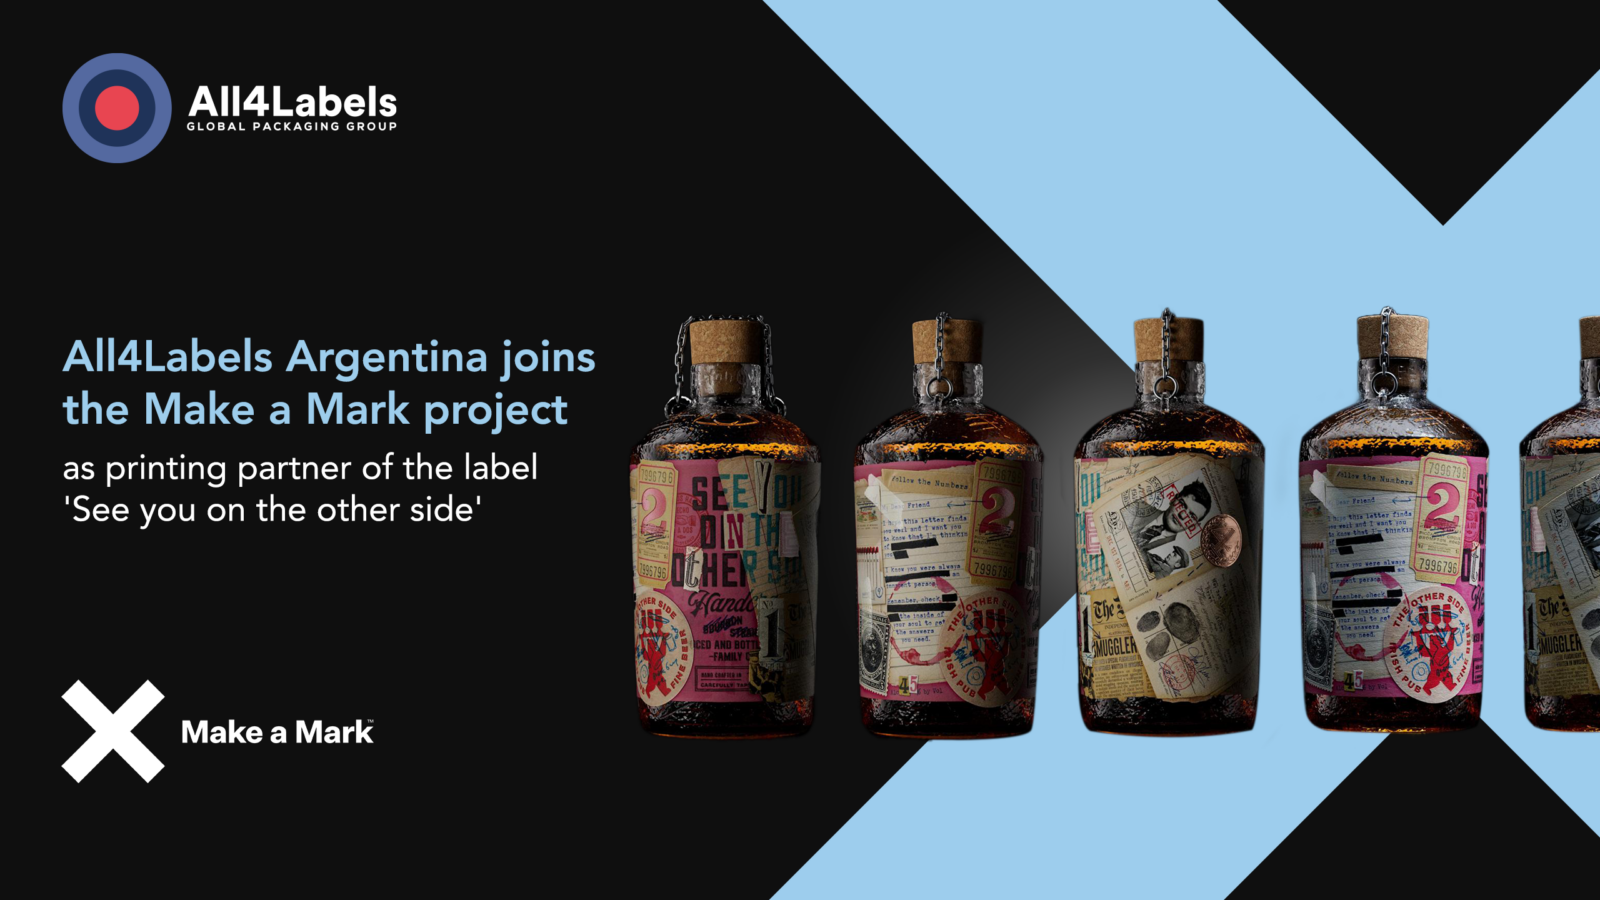 All4Labels’ engagement in “Make a Mark” project